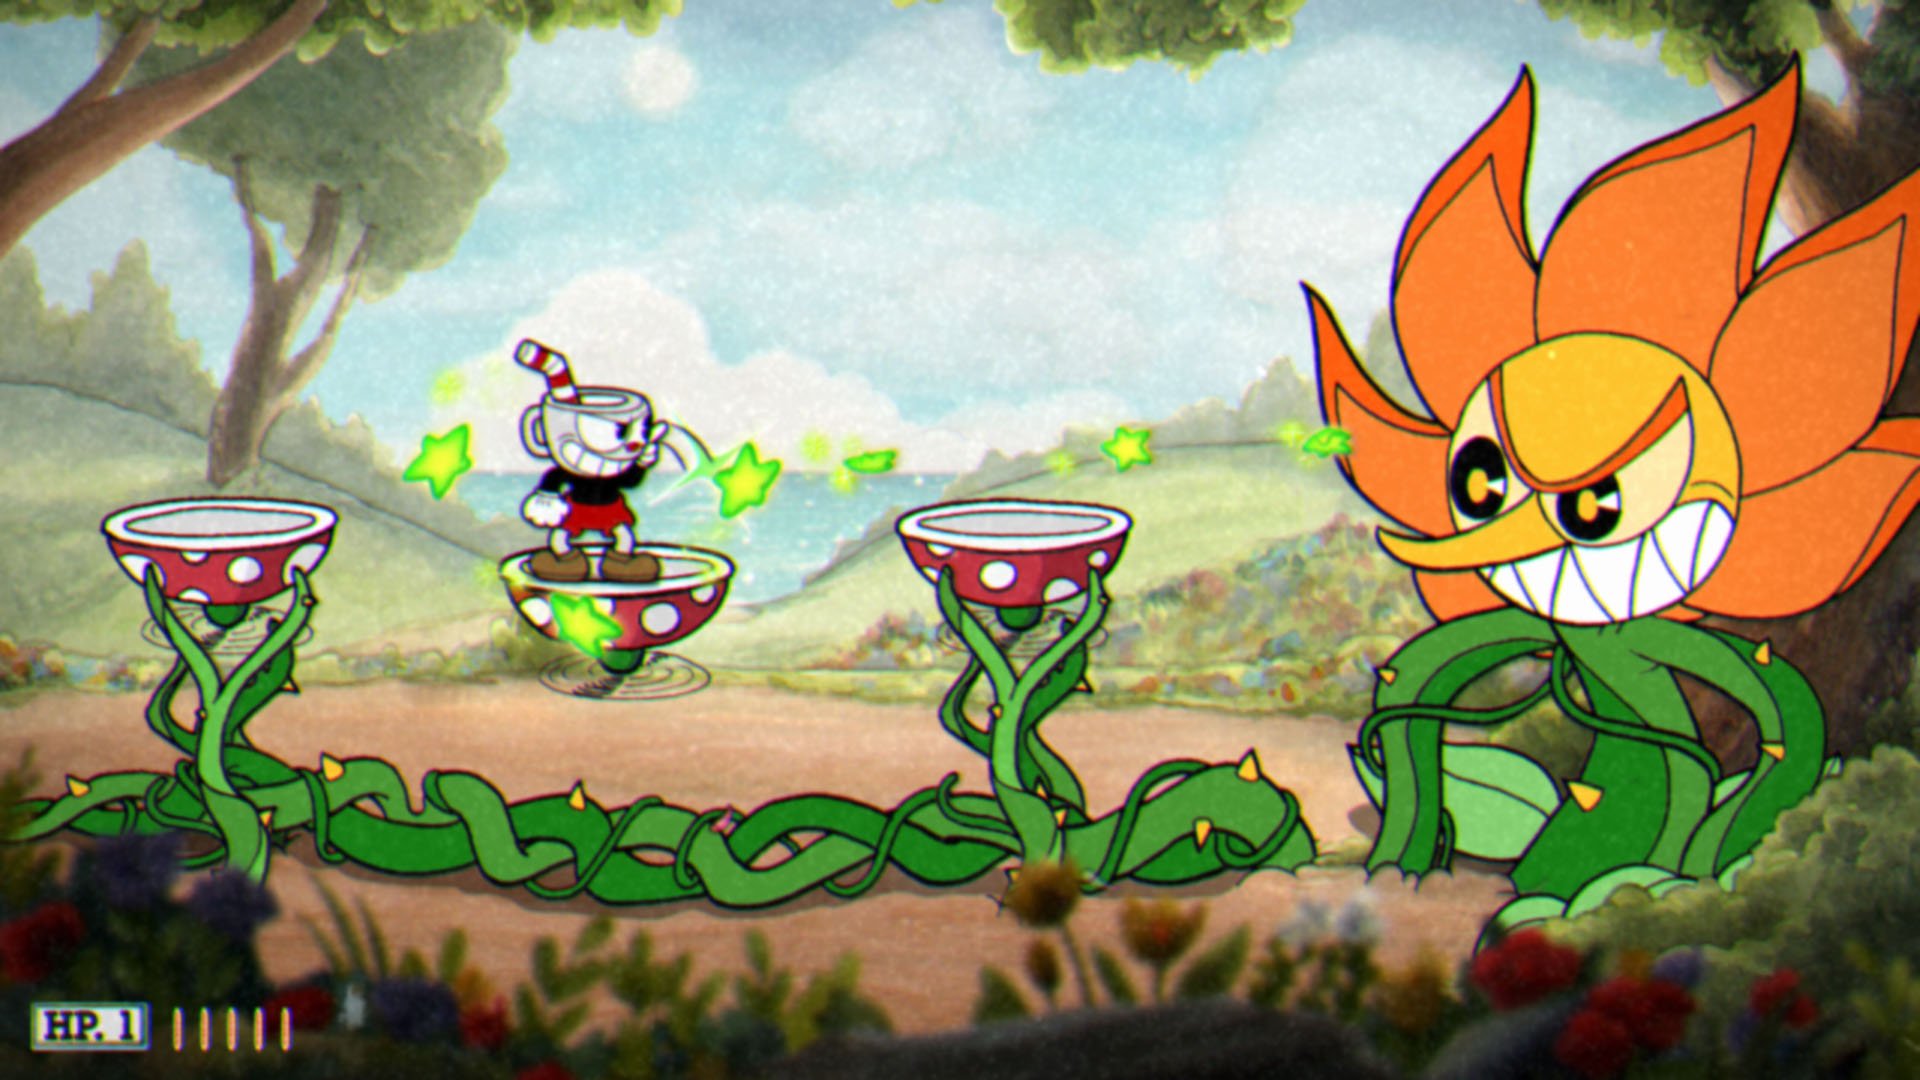 Cuphead claims three DICE Awards while Breath of the Wild takes home Game of the Year